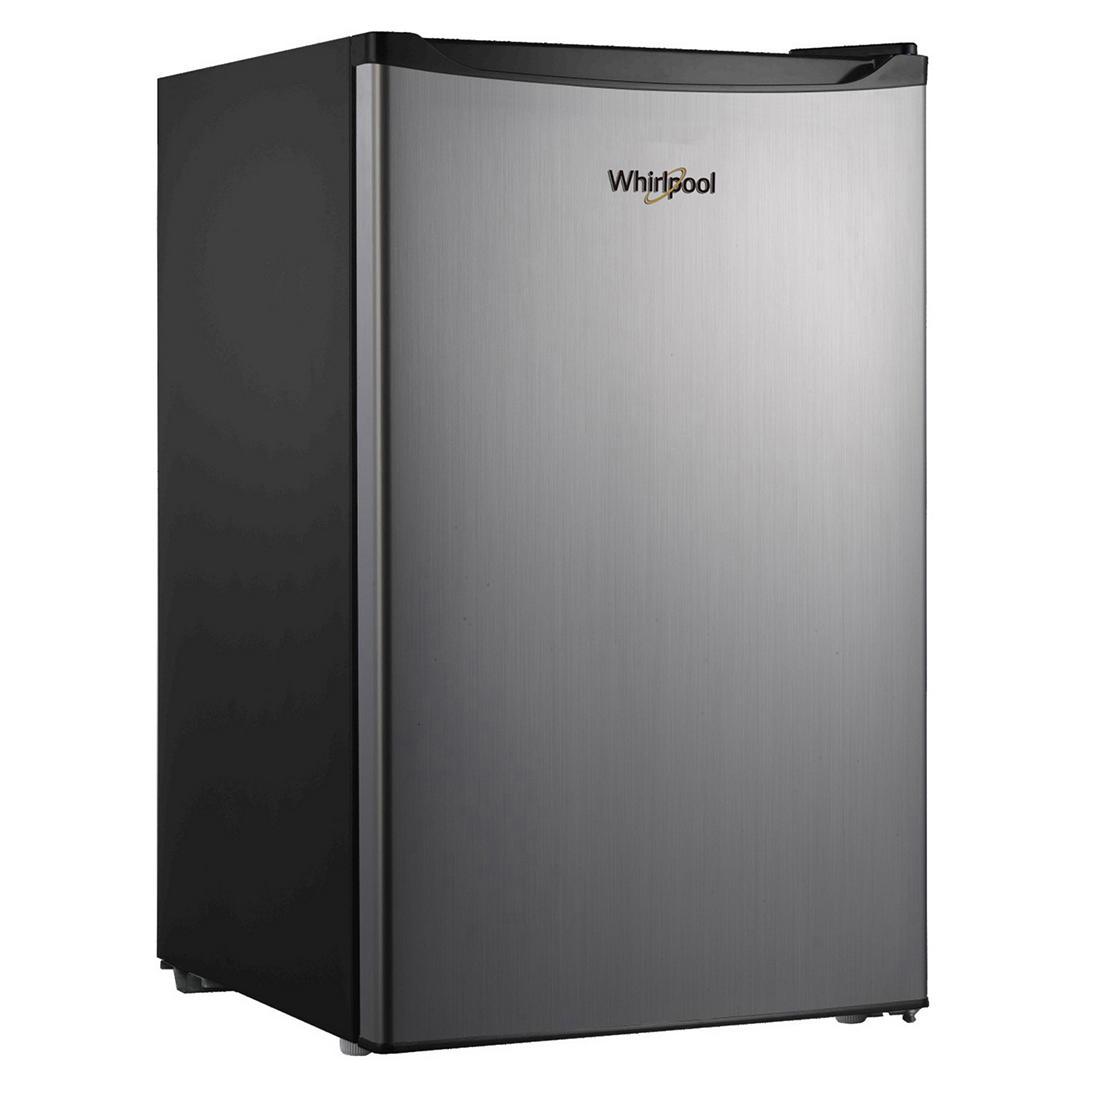 Whirlpool 4.3ft Mini Refrigerator Stainless Steel for $135 Shipped